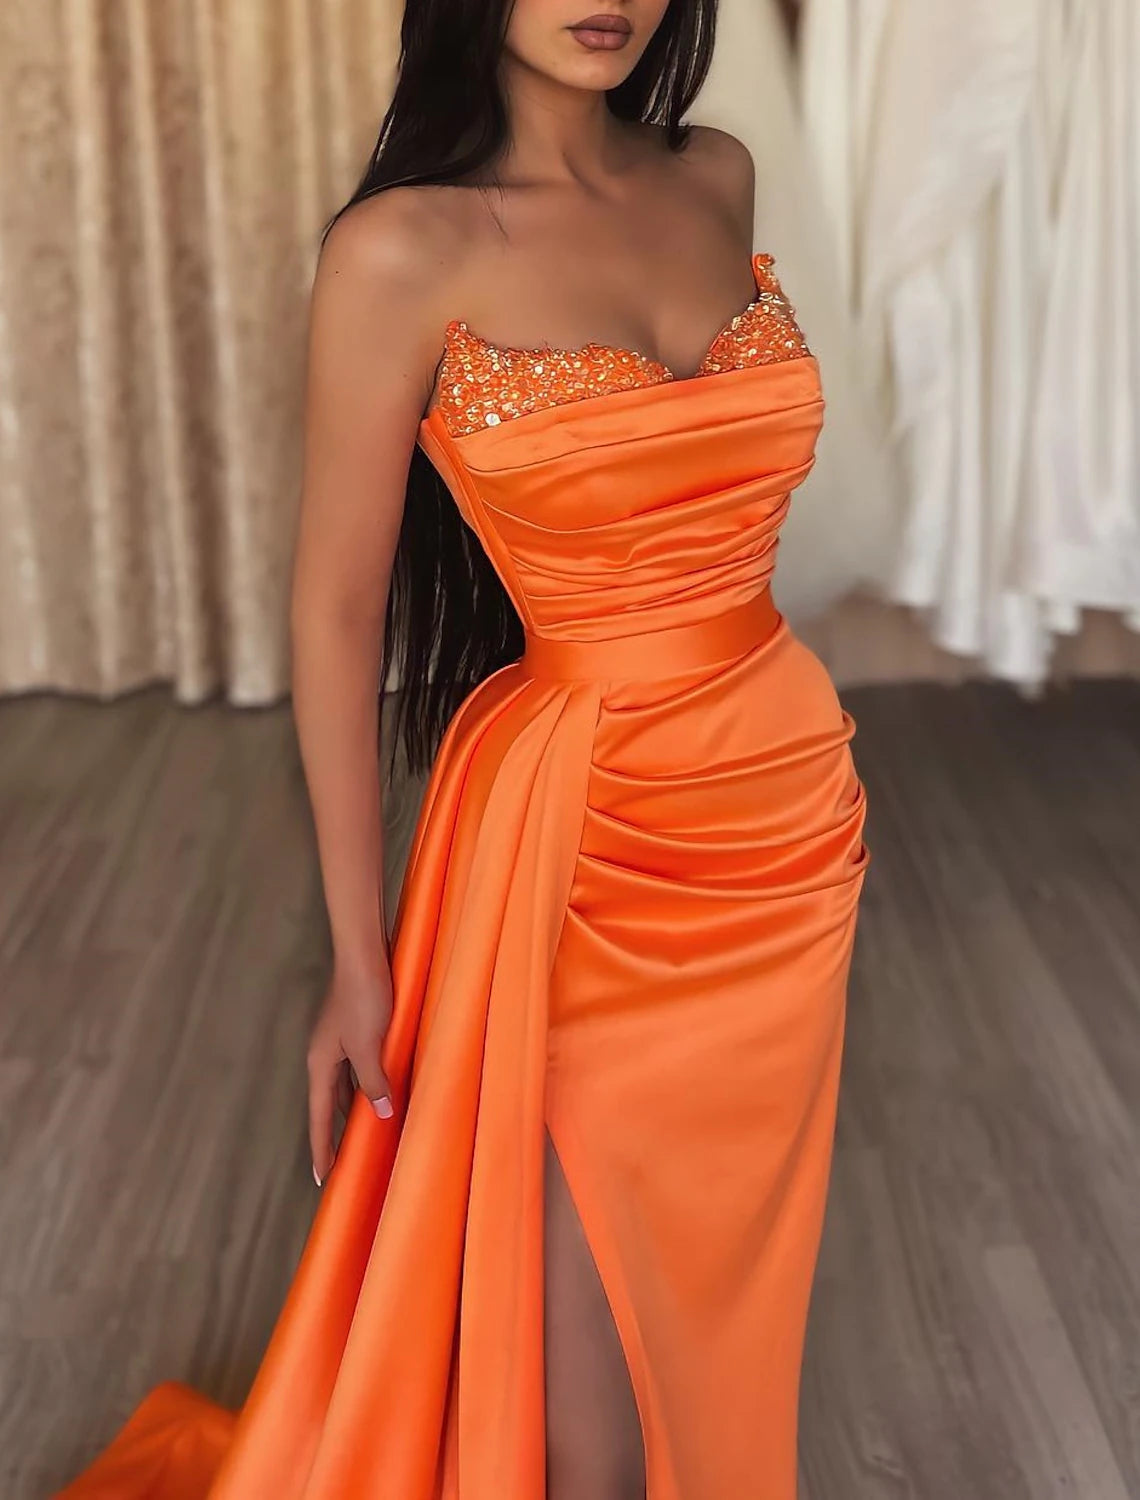 Mermaid Ruched Evening Gown Satin Dress Cocktail Party Prom Court Train Sleeveless Strapless Bridesmaid Dress with Beading Sequin Pure Color